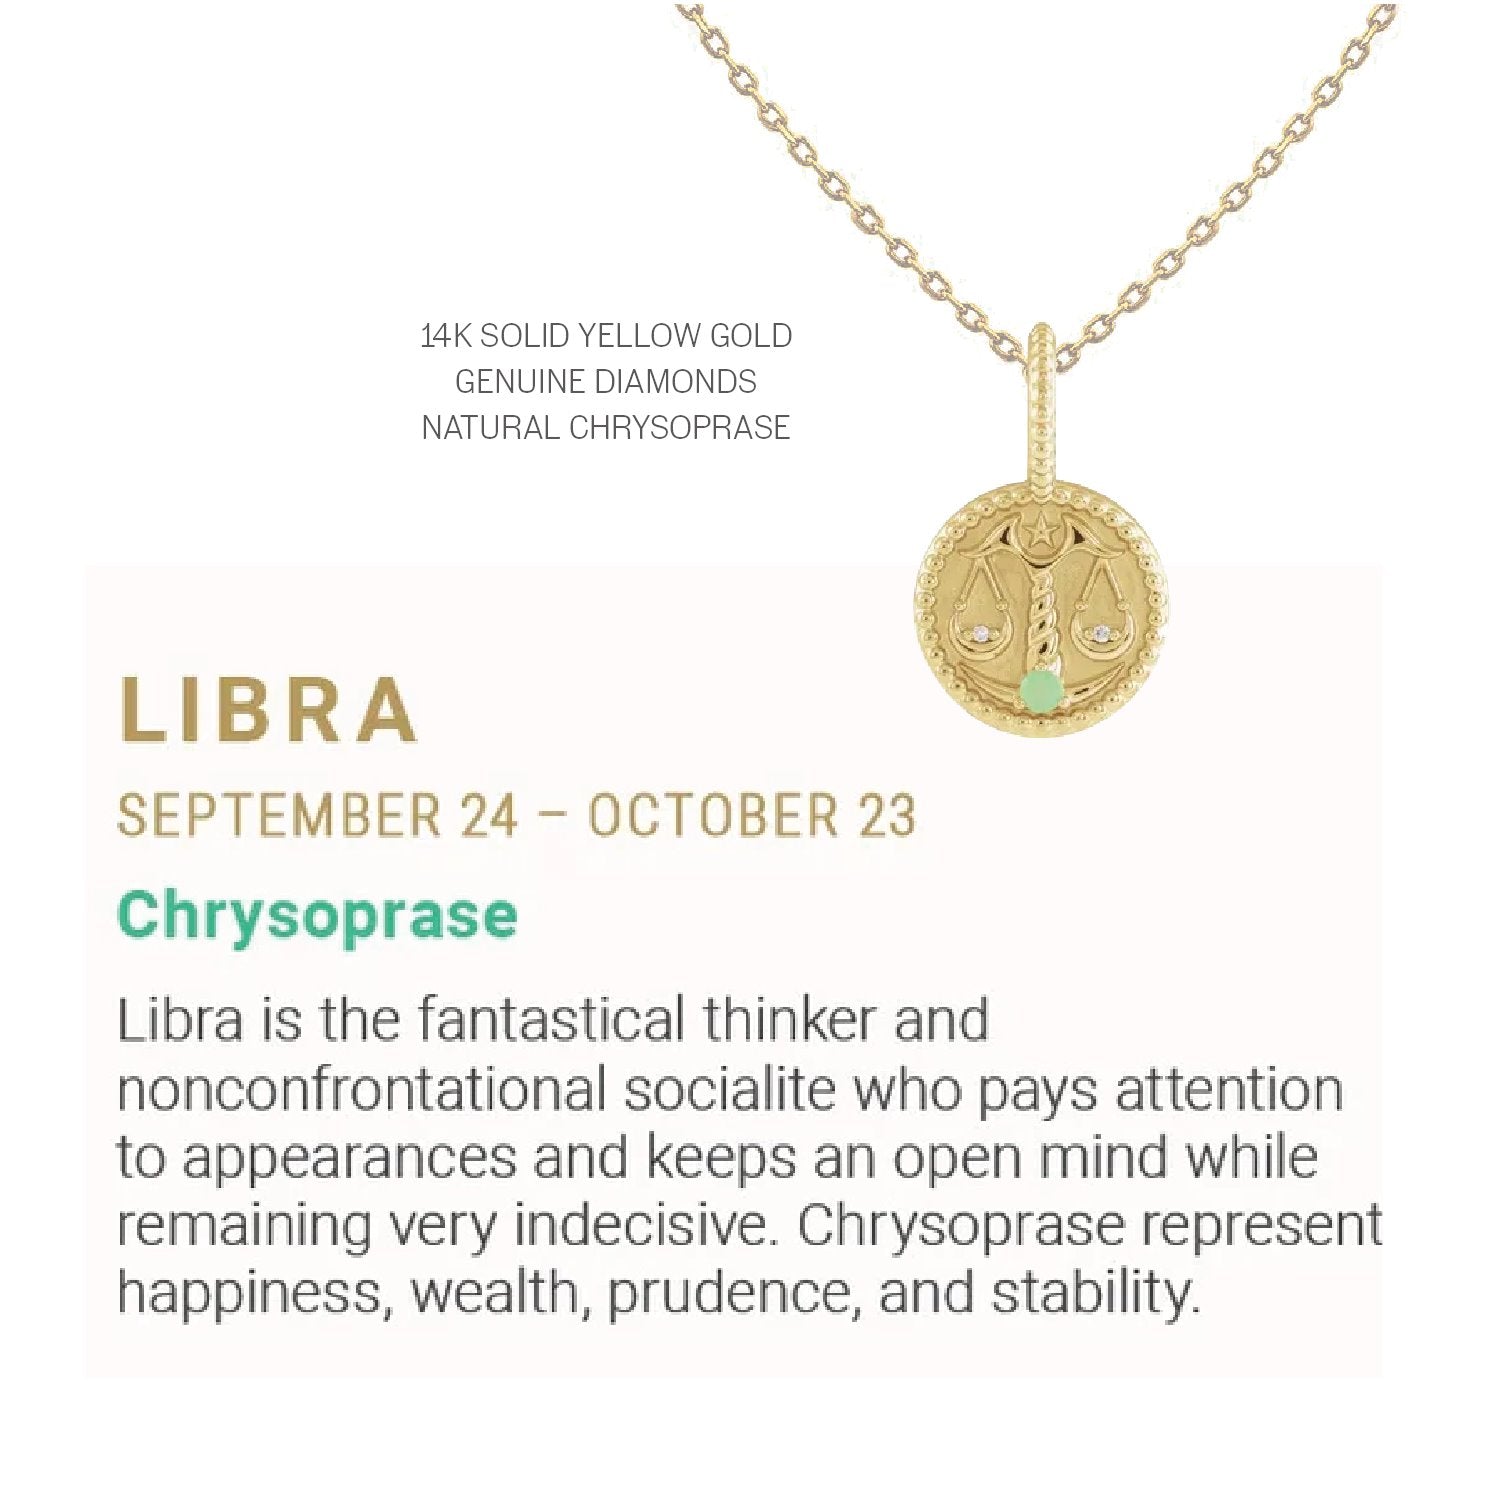 Zodiac Charm Necklace in 14K Gold with Diamonds Necklace Robyn Canady 14K Solid Gold 16" Libra